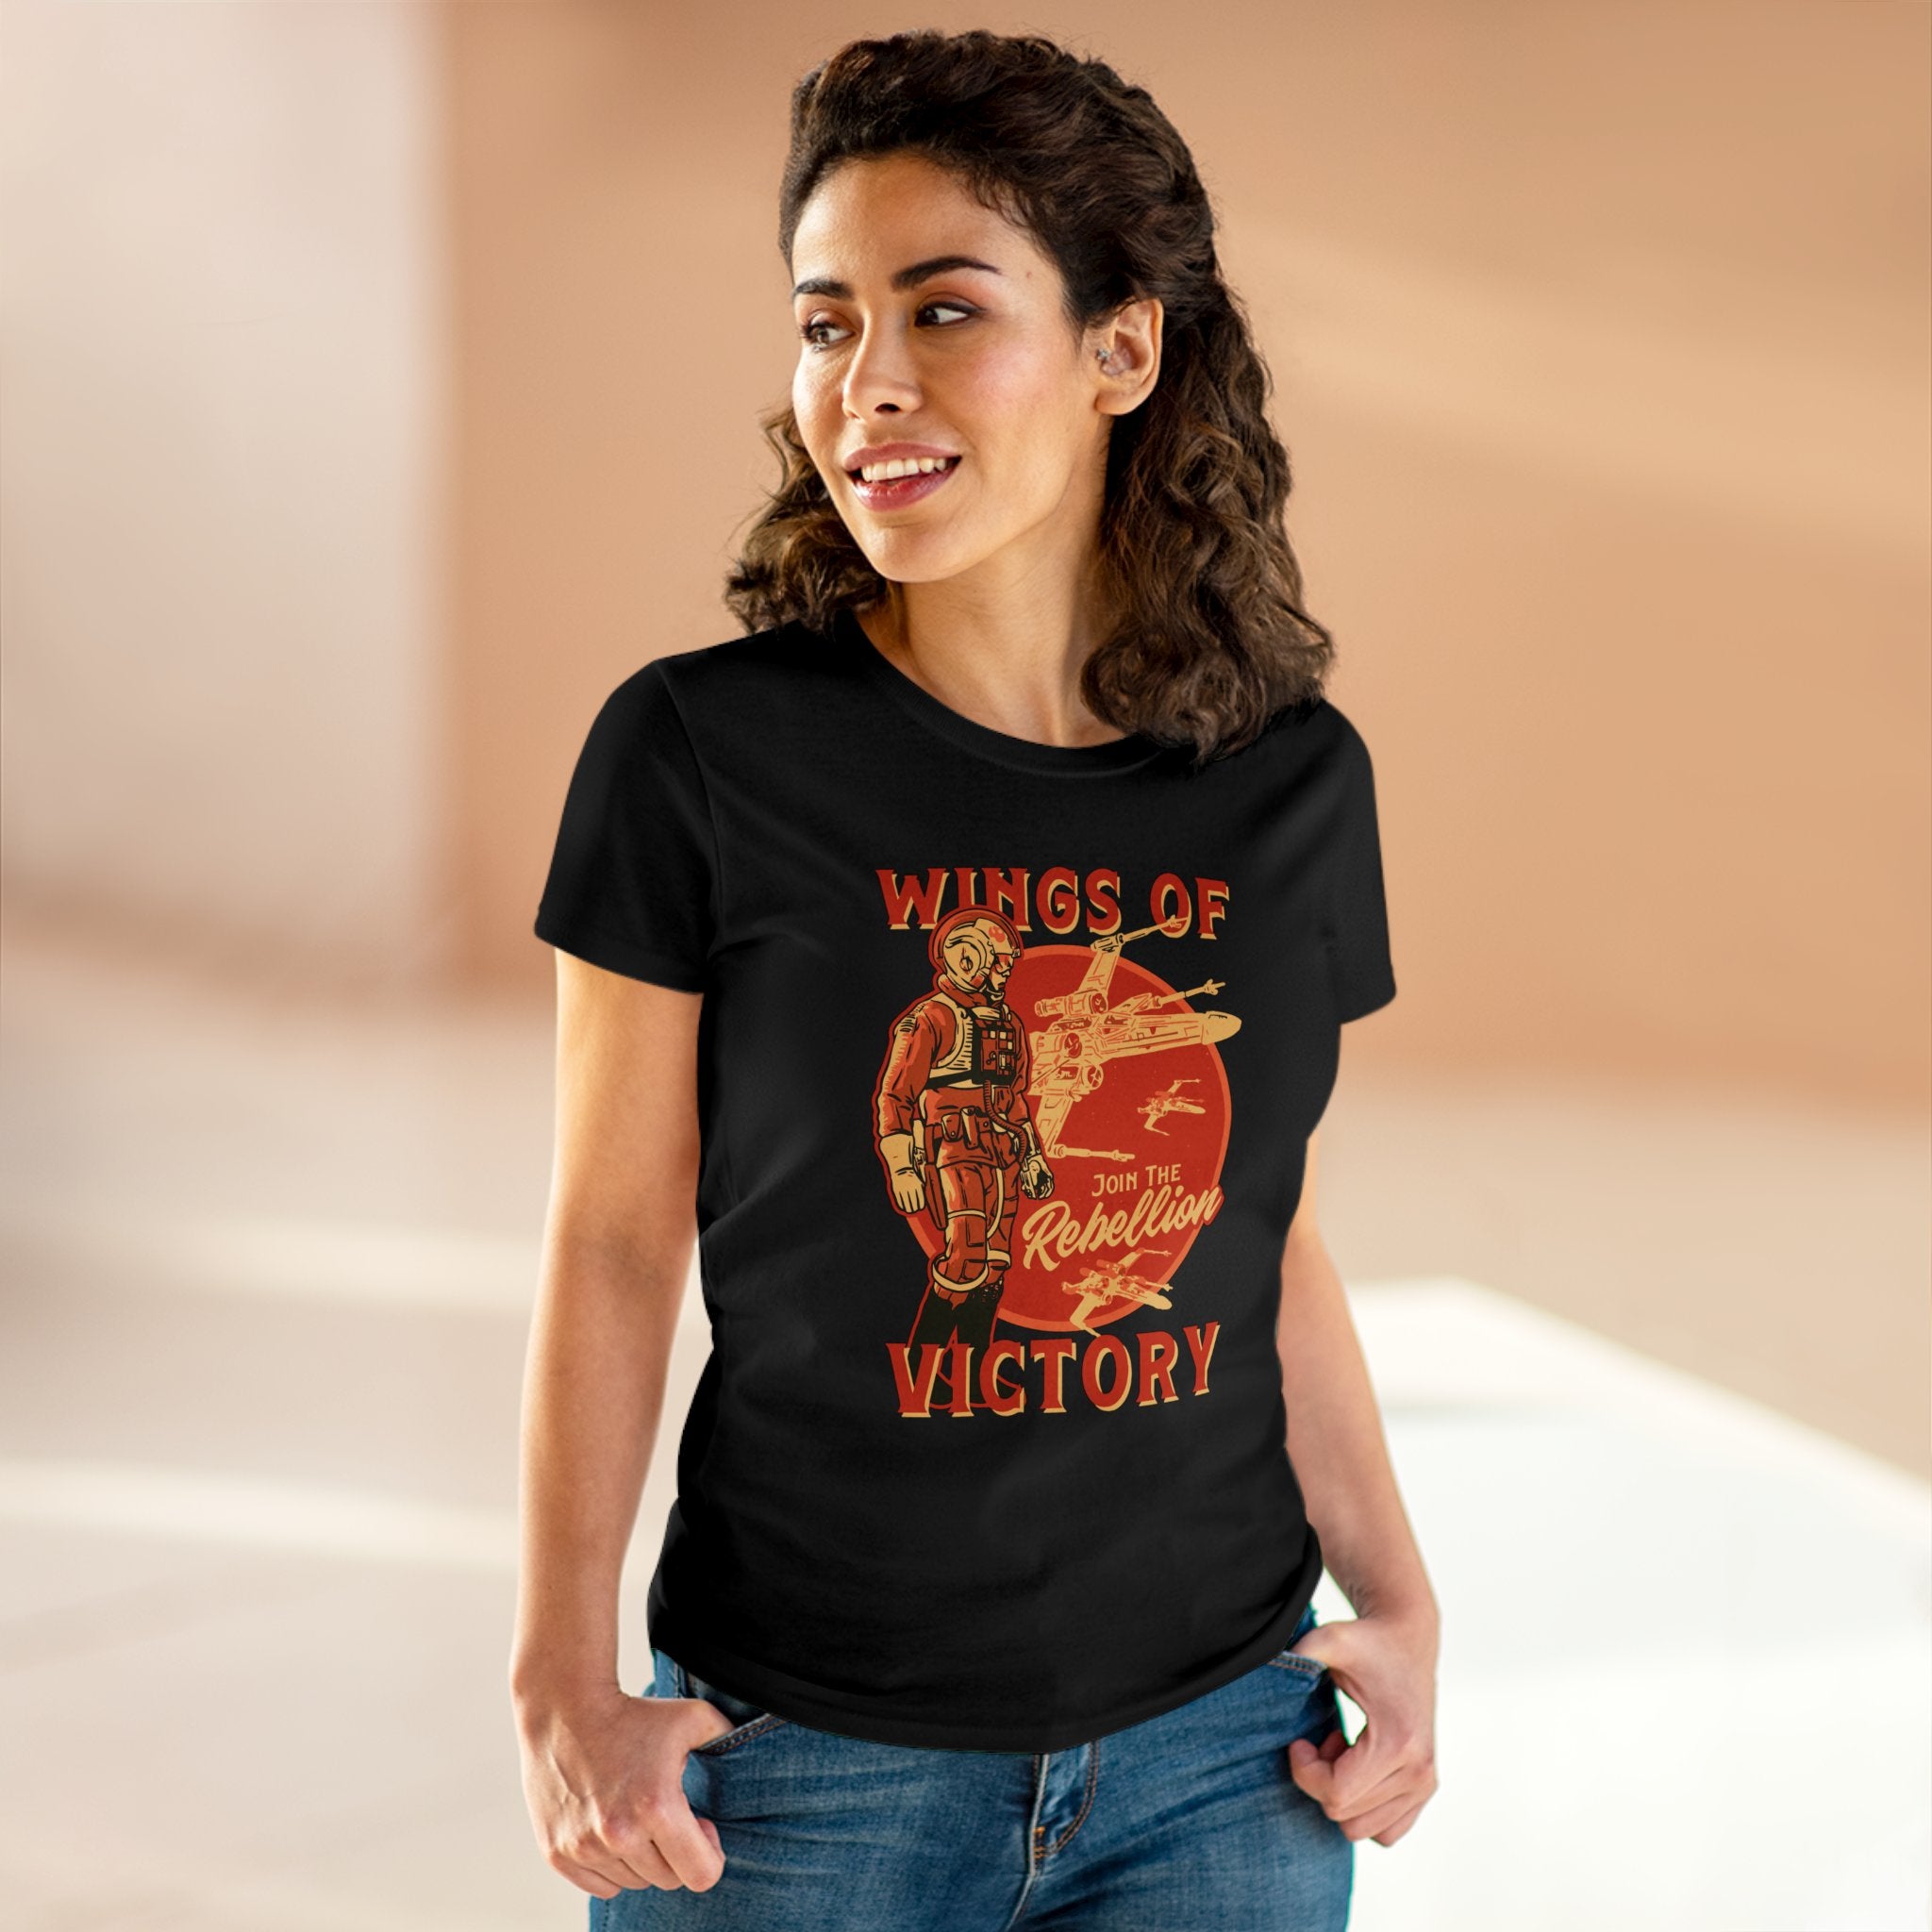 A woman wearing a black, pre-shrunk Wings of Victory - Women's Tee with a graphic design featuring a character, text that reads "Wings of Victory" and "Join the Rebellion," and jeans, smiles while standing indoors.